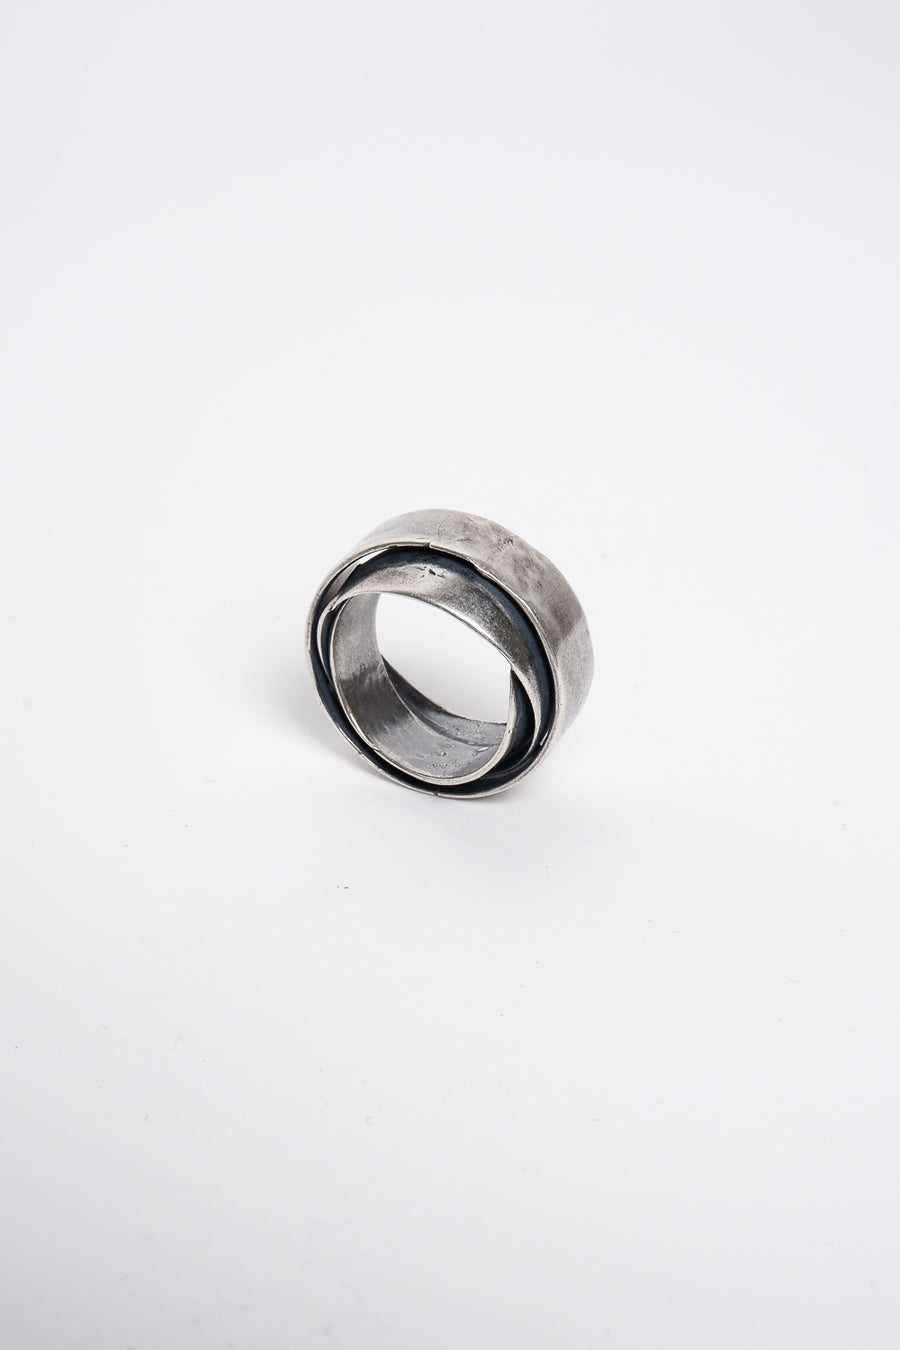 Buy the GOTI AN504 Ring at Intro. Spend £50 for free UK delivery. Official stockists. We ship worldwide.